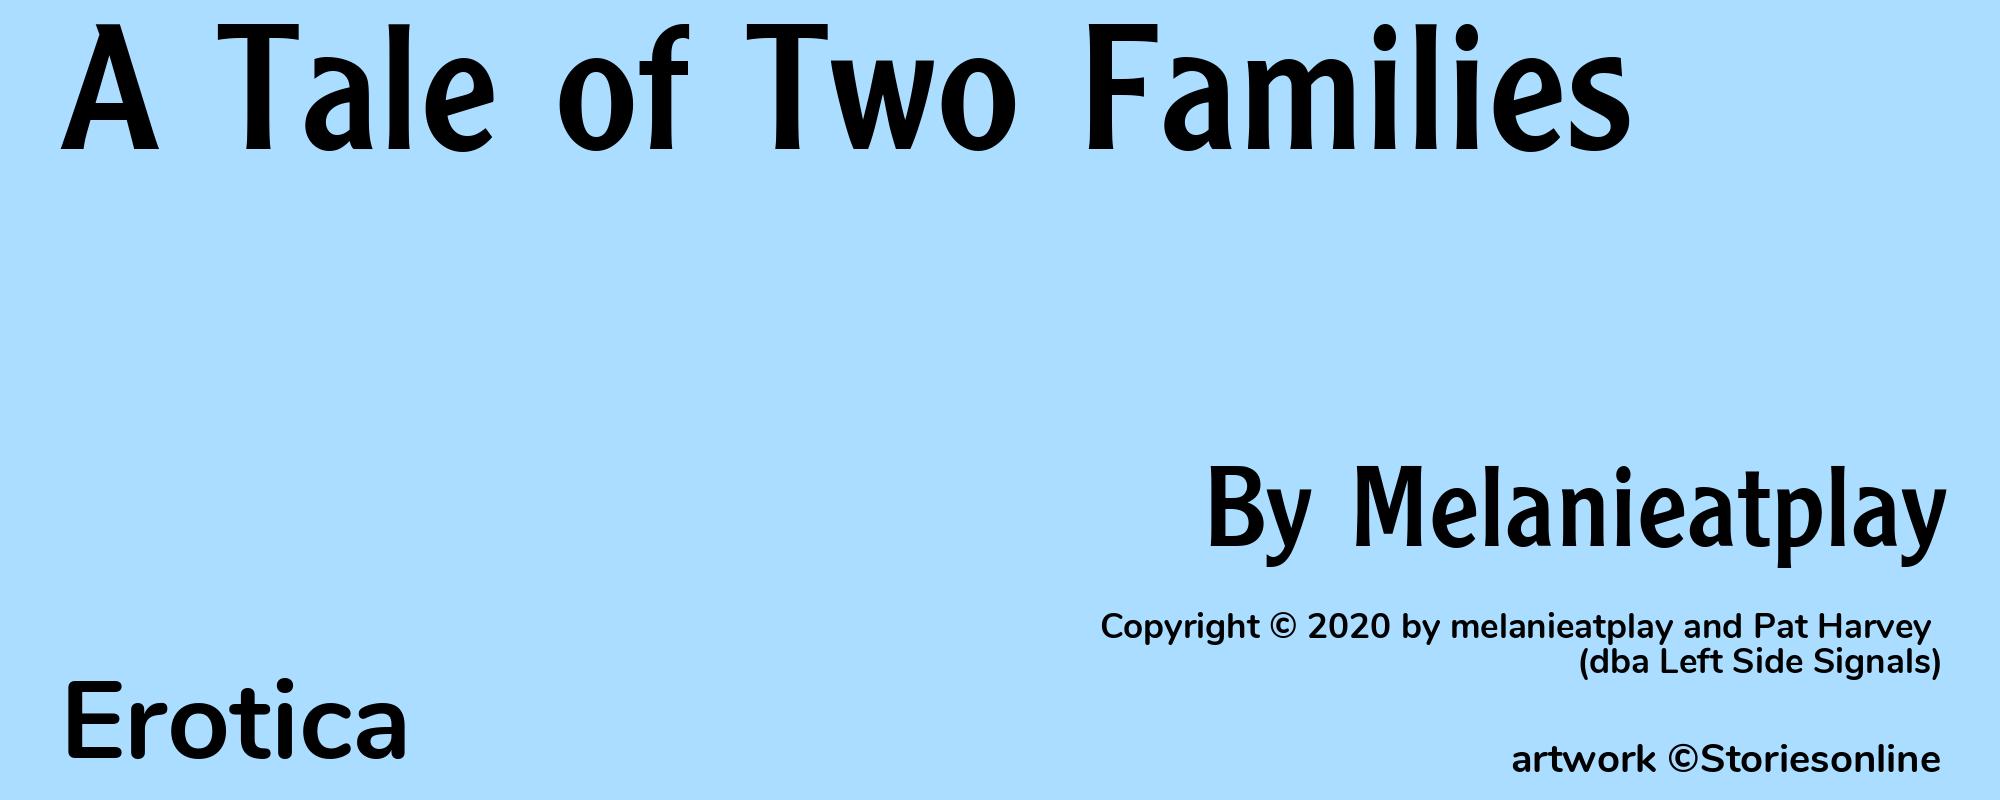 A Tale of Two Families - Cover